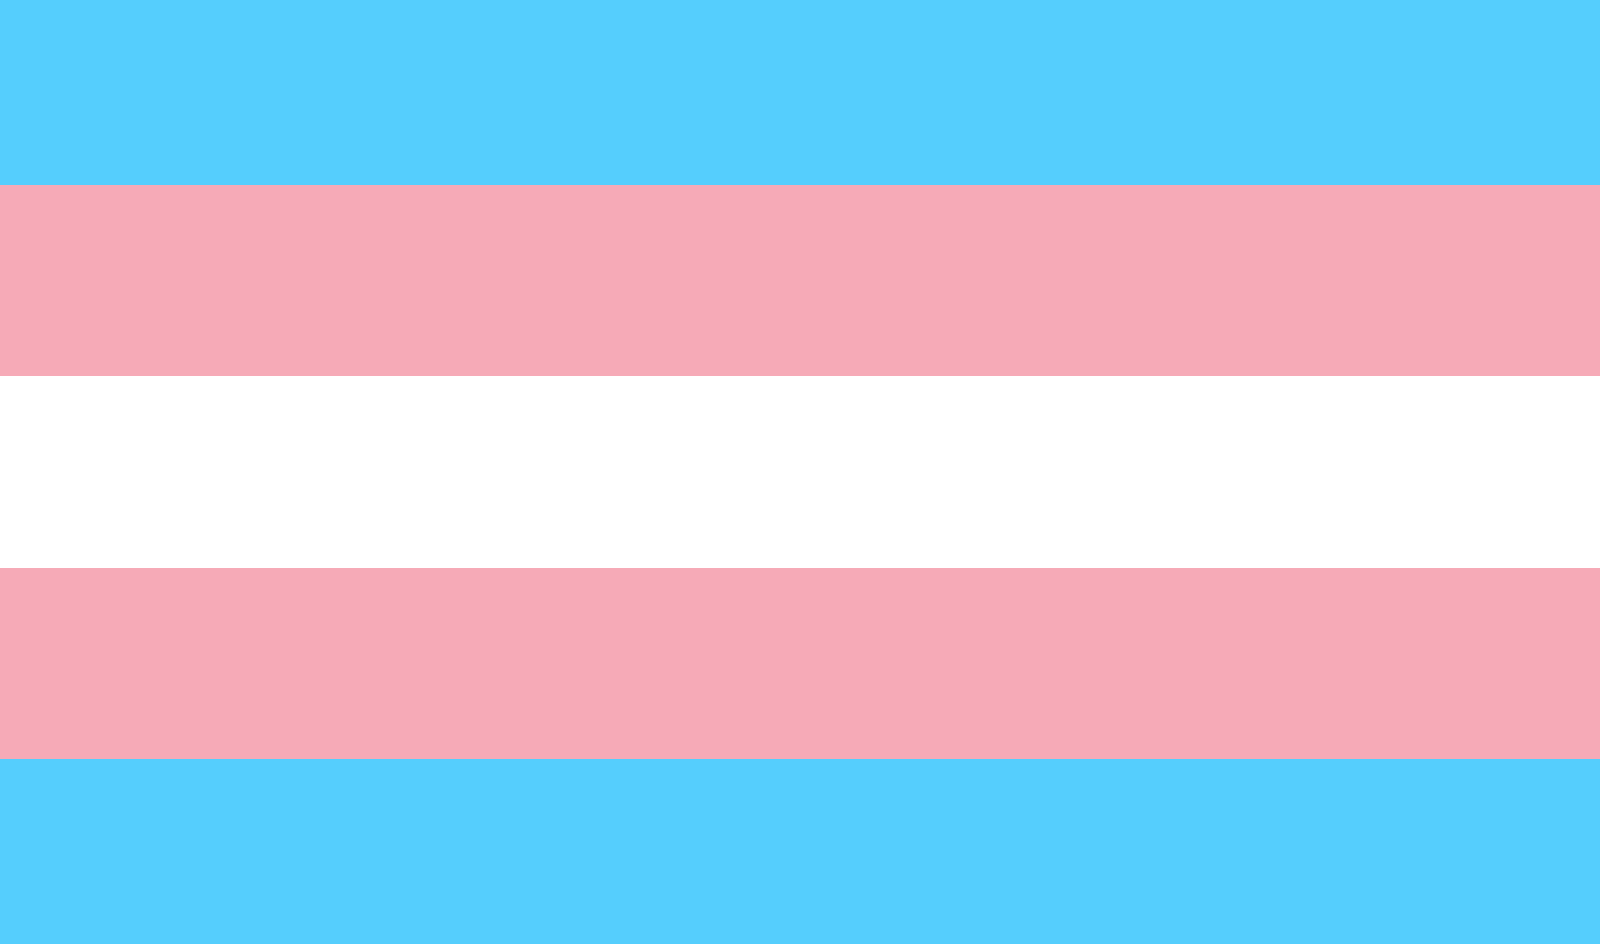 Trans Flag: Colors & Meaning Behind Each One